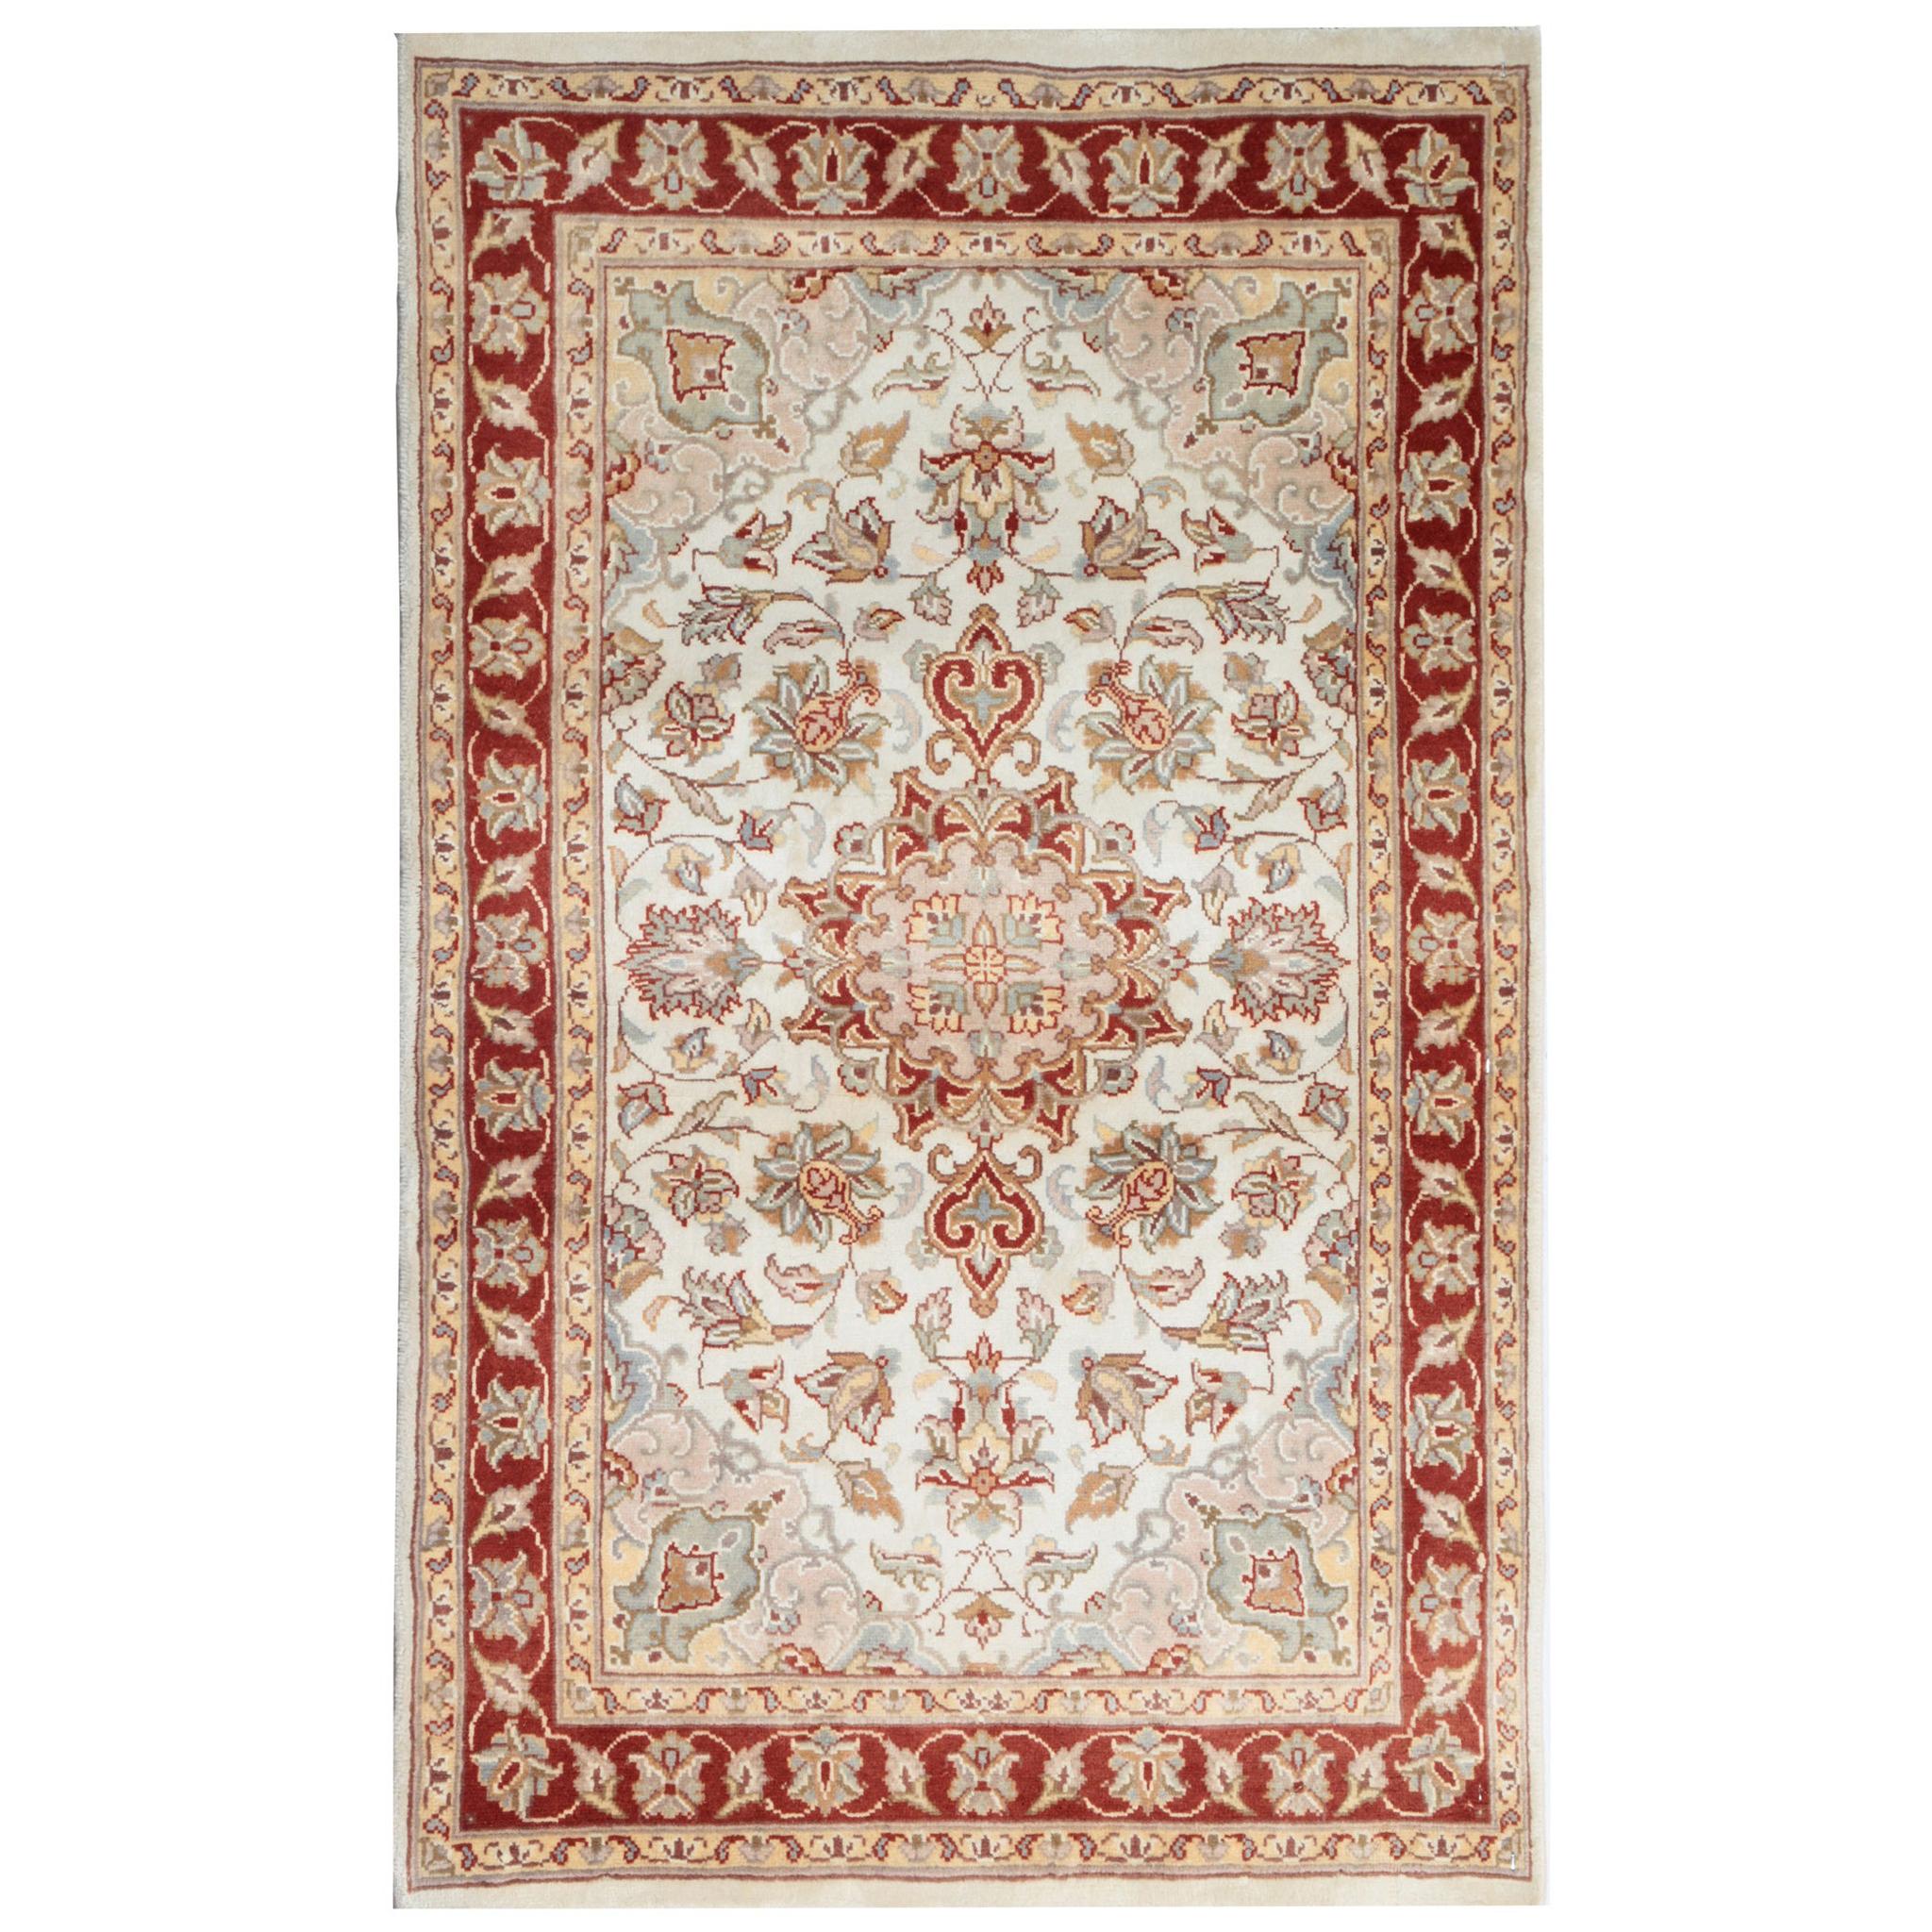 Traditional Area Rugs, Indian Carpet Cream Rug, Floor Rugs for Sale Red Border